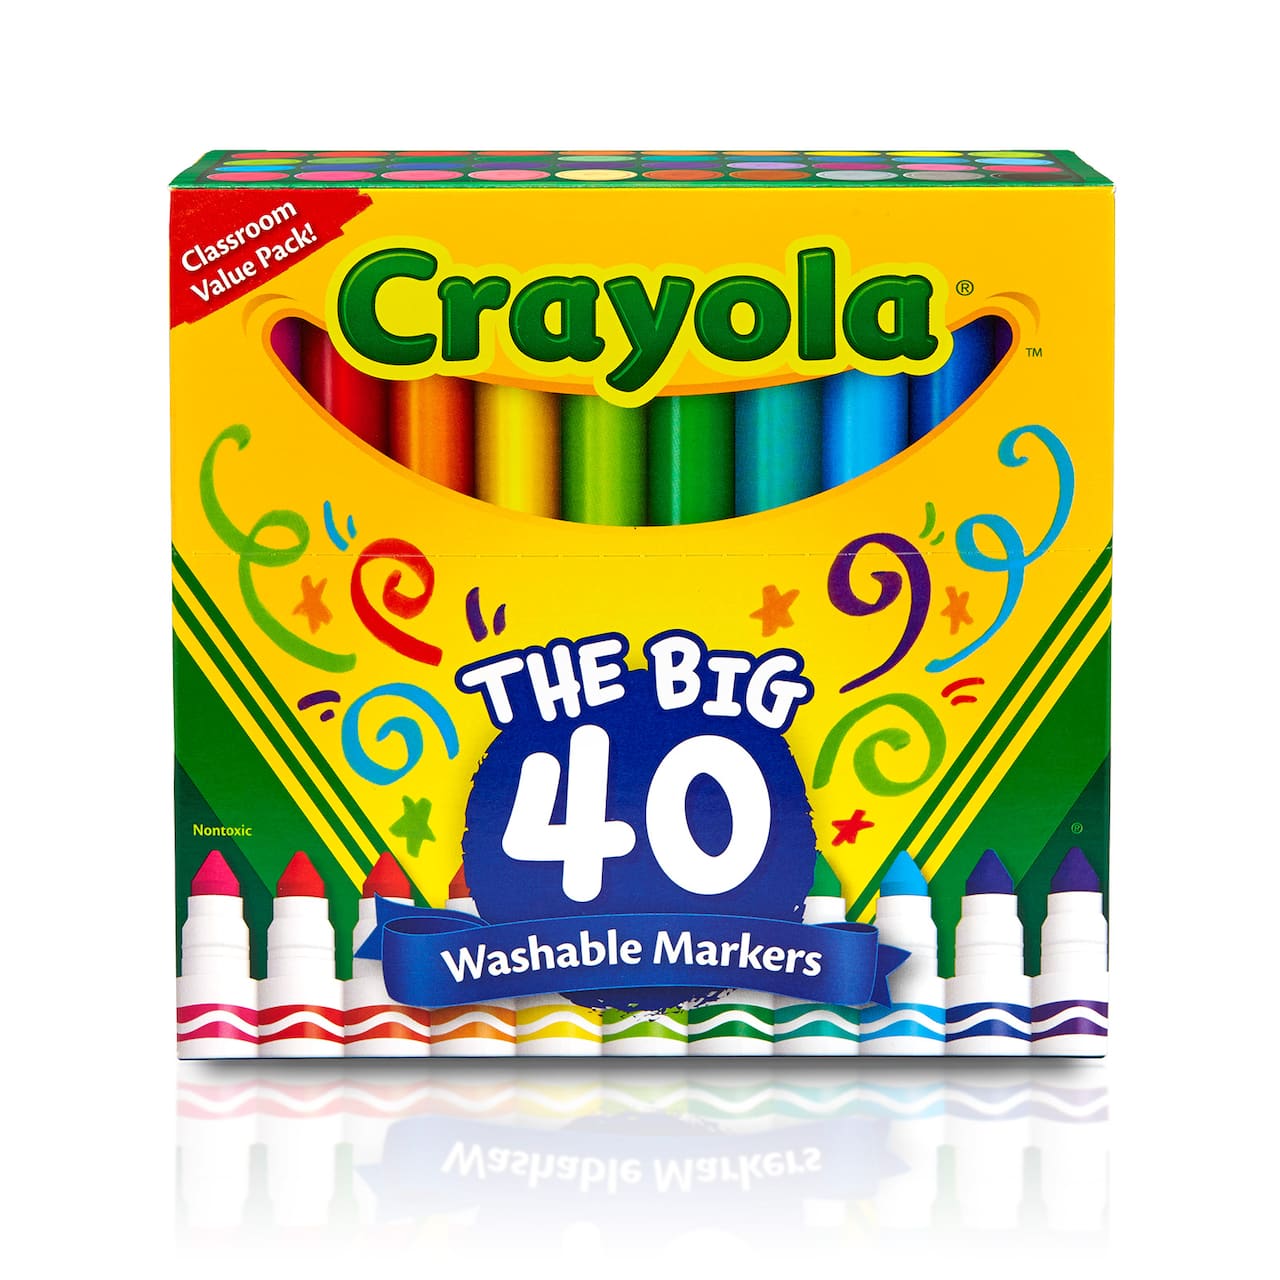 Crayola Ultra Clean Washable Classic Colors Broad Line Markers